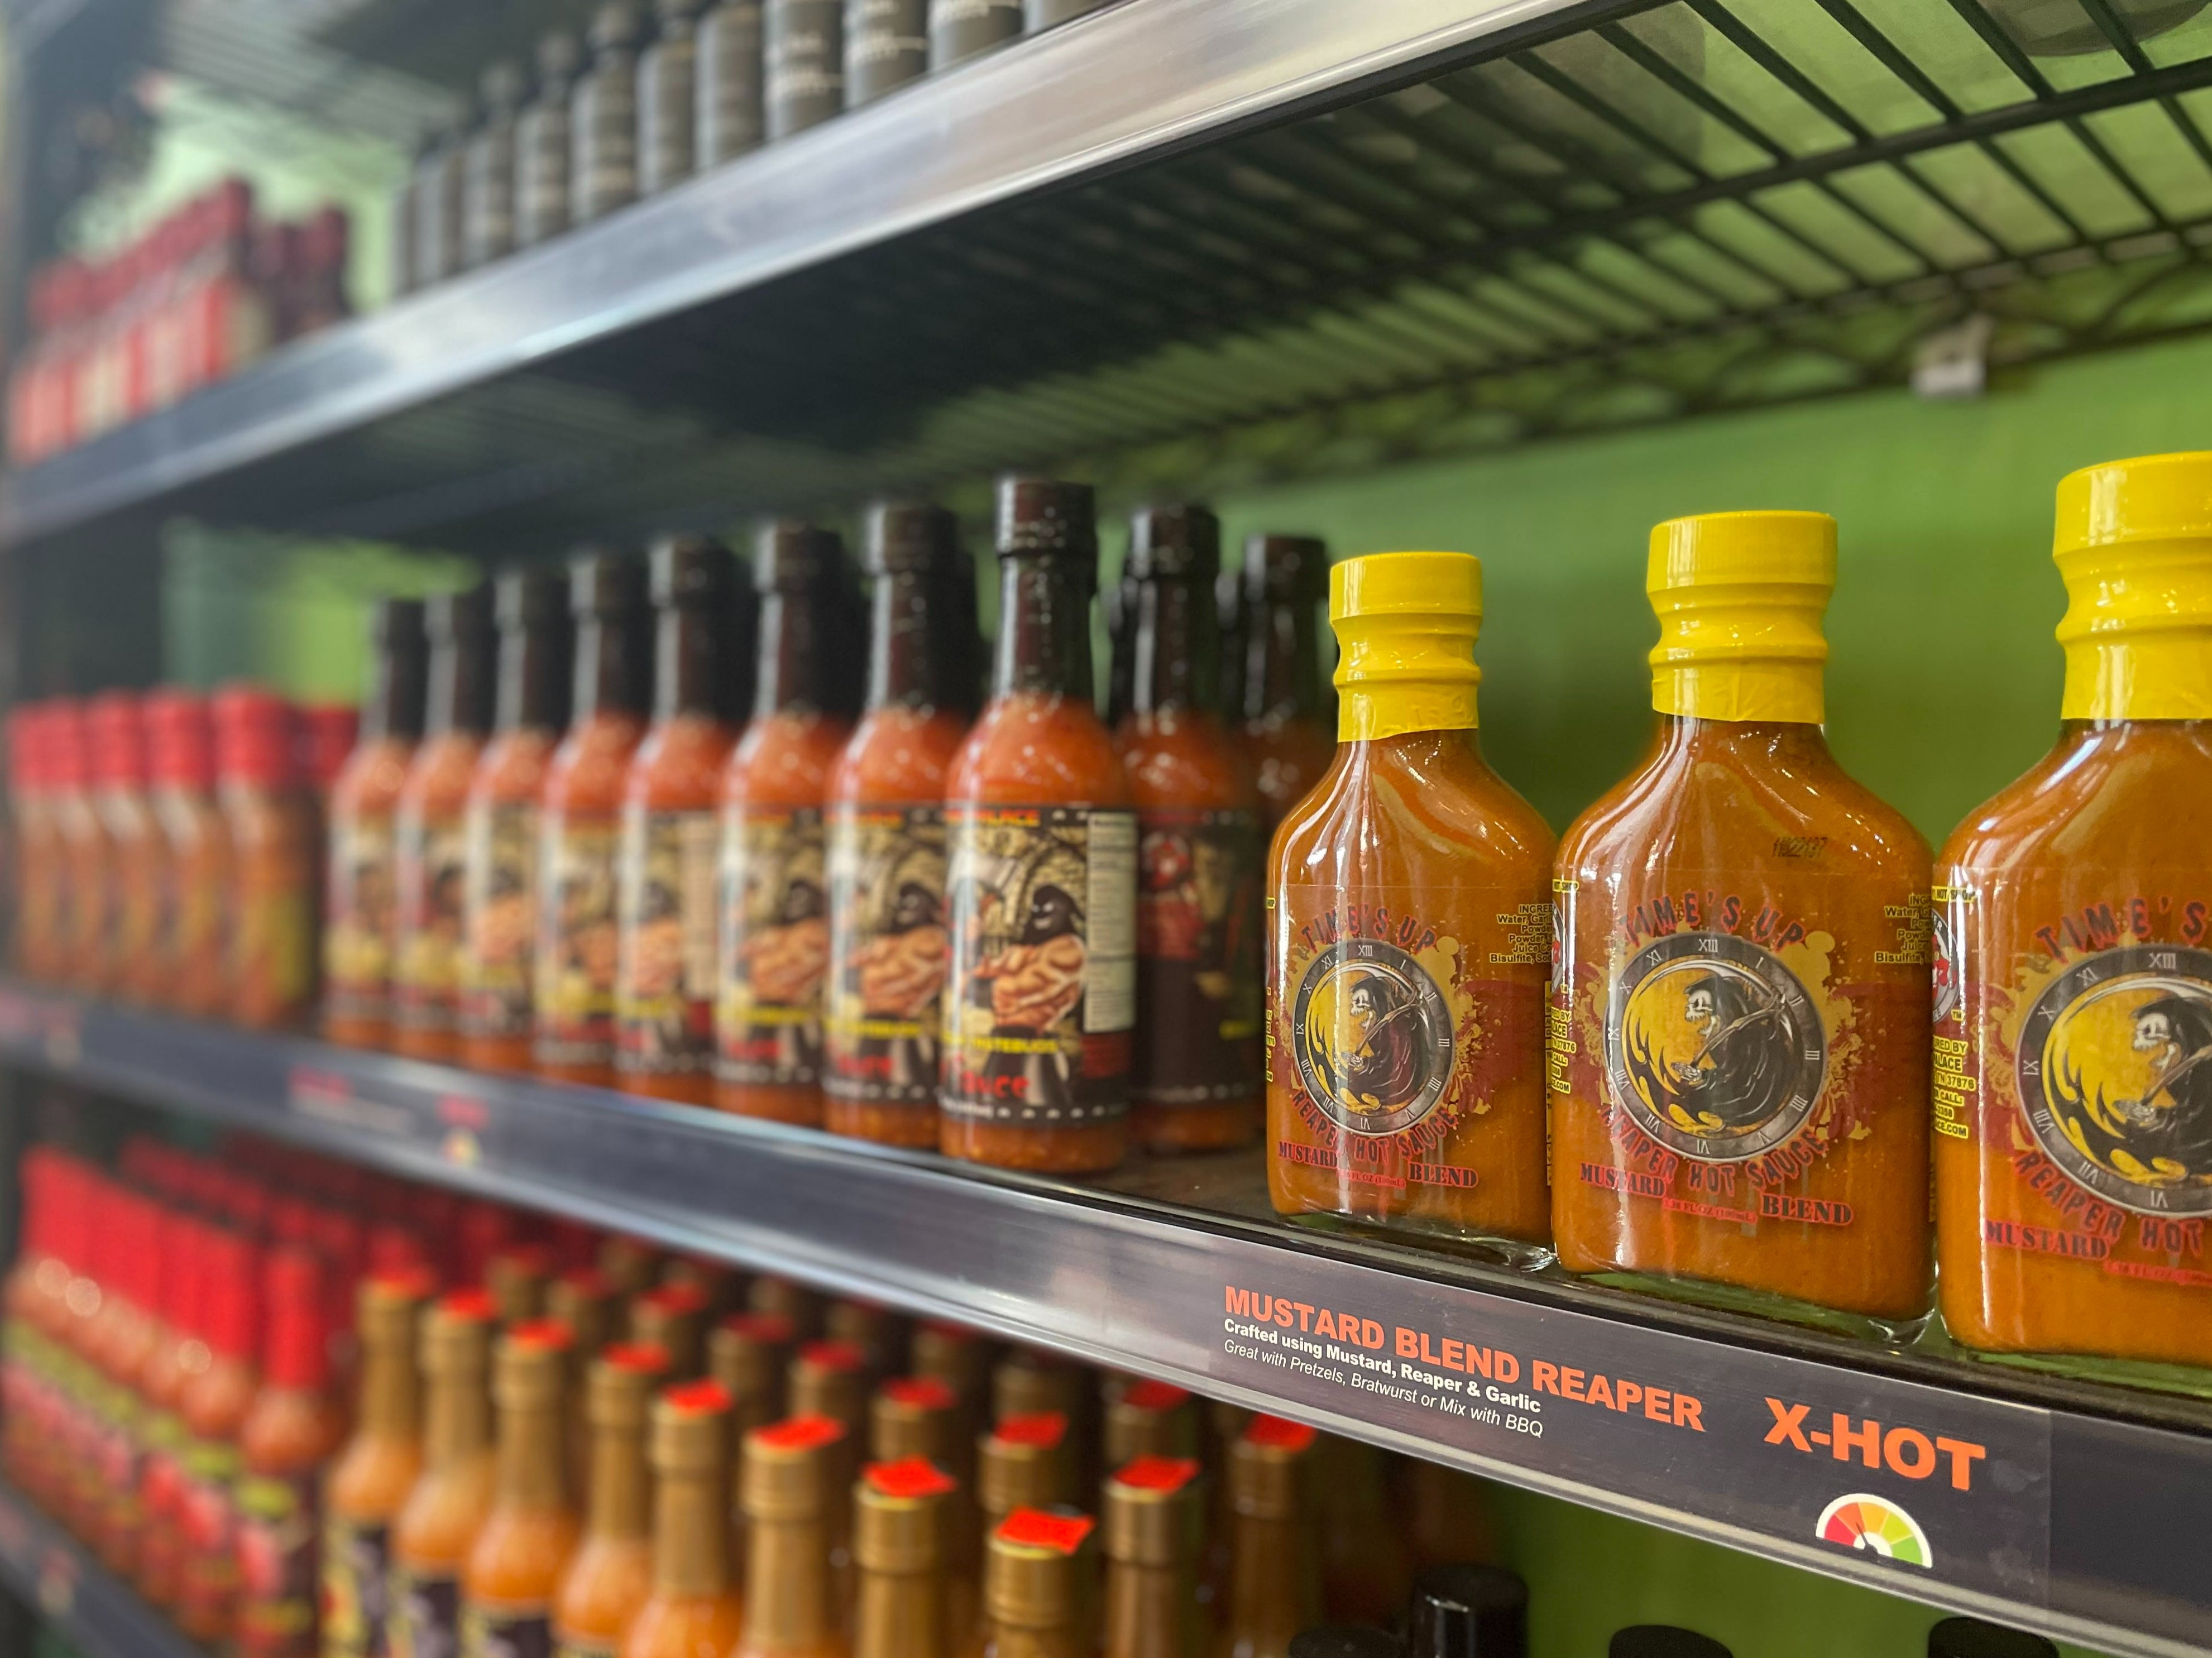 Louisiana is the home of hot sauce